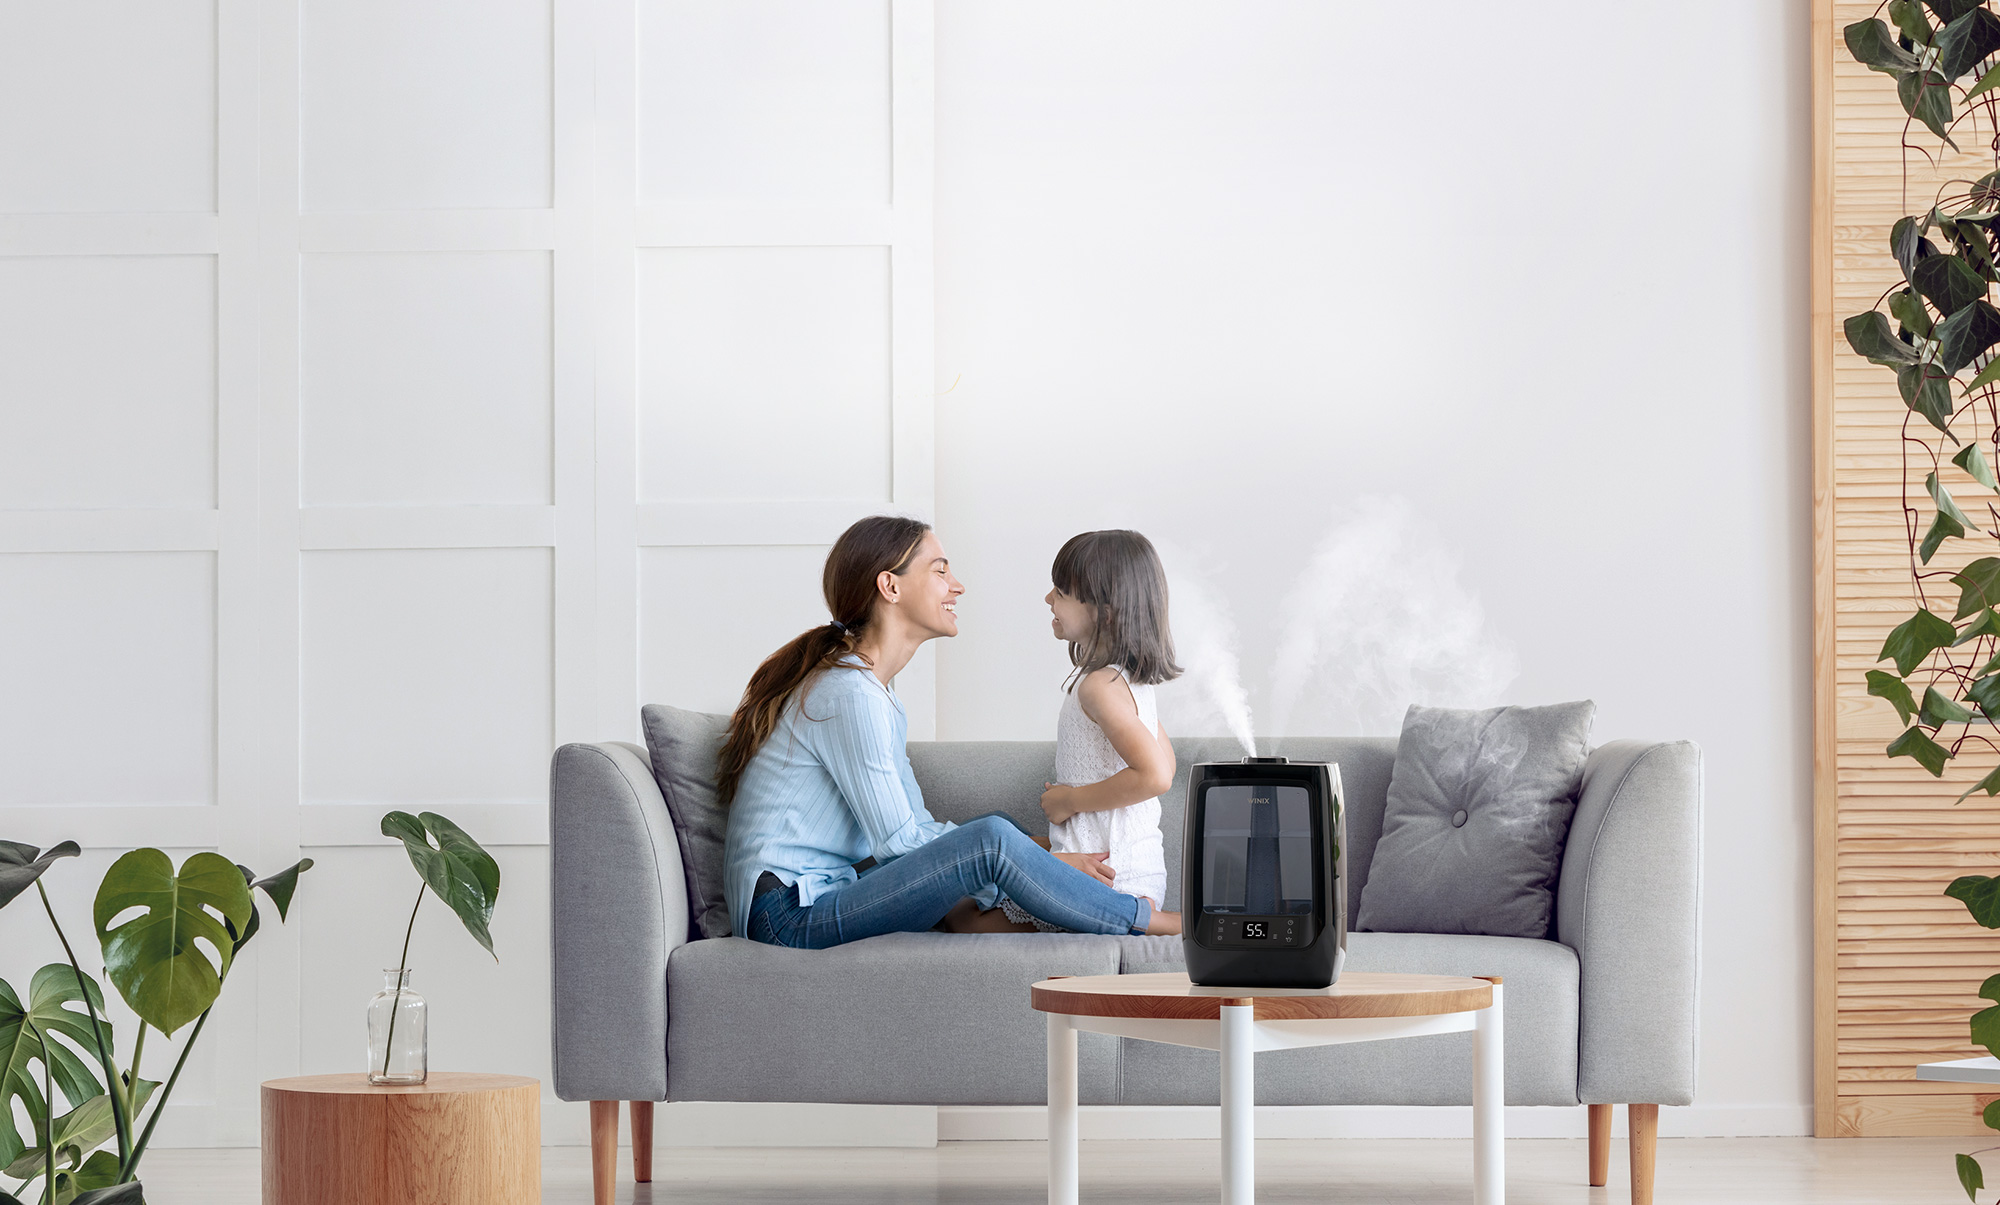 L200 Humidifier on side table next to woman and young child sitting on a couch